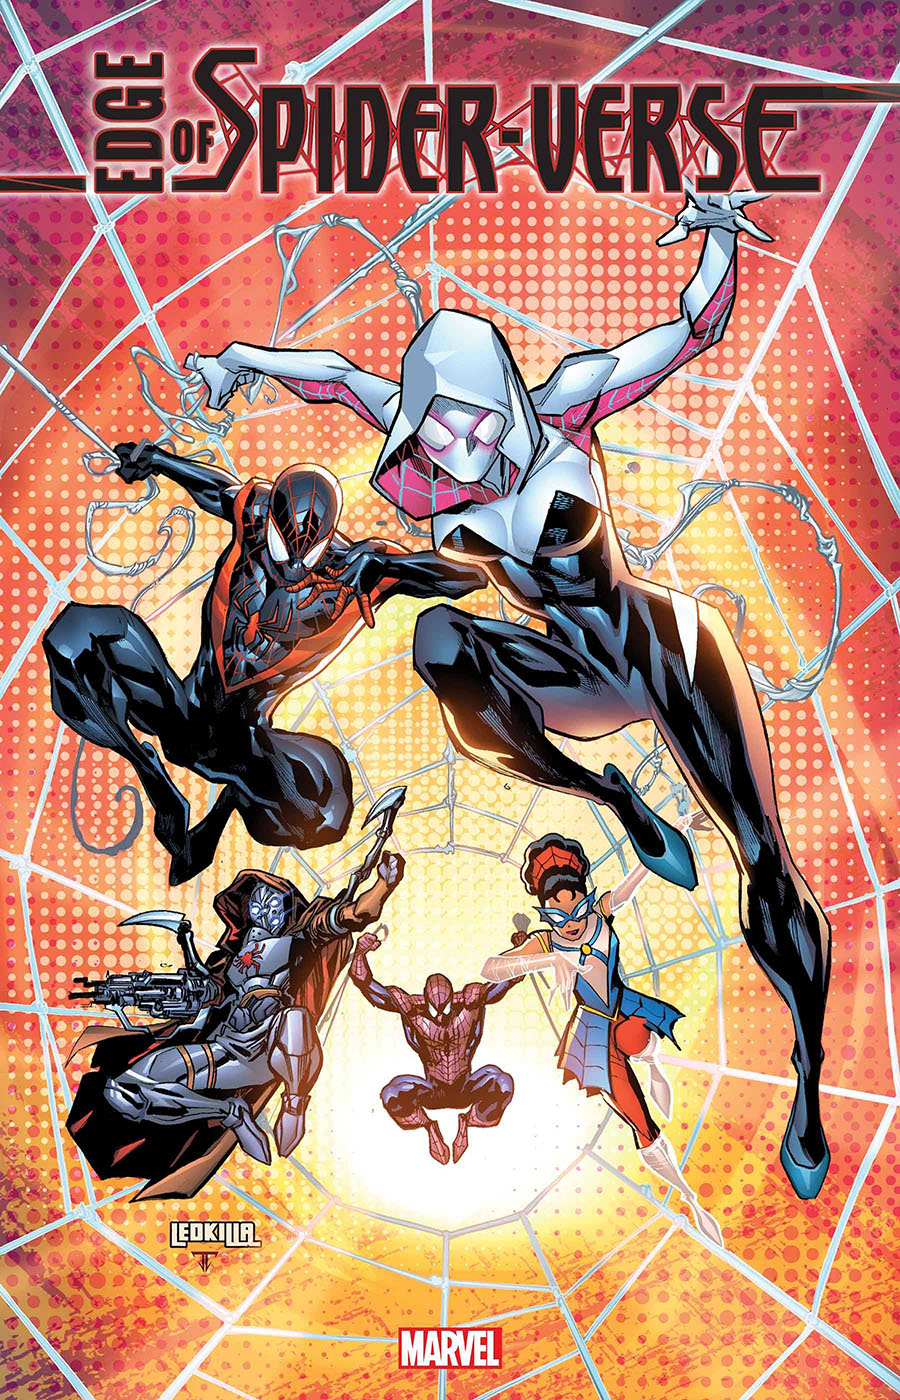 Edge Of Spider-Verse Vol 3 #1 Cover F Incentive Ken Lashley Variant Cover